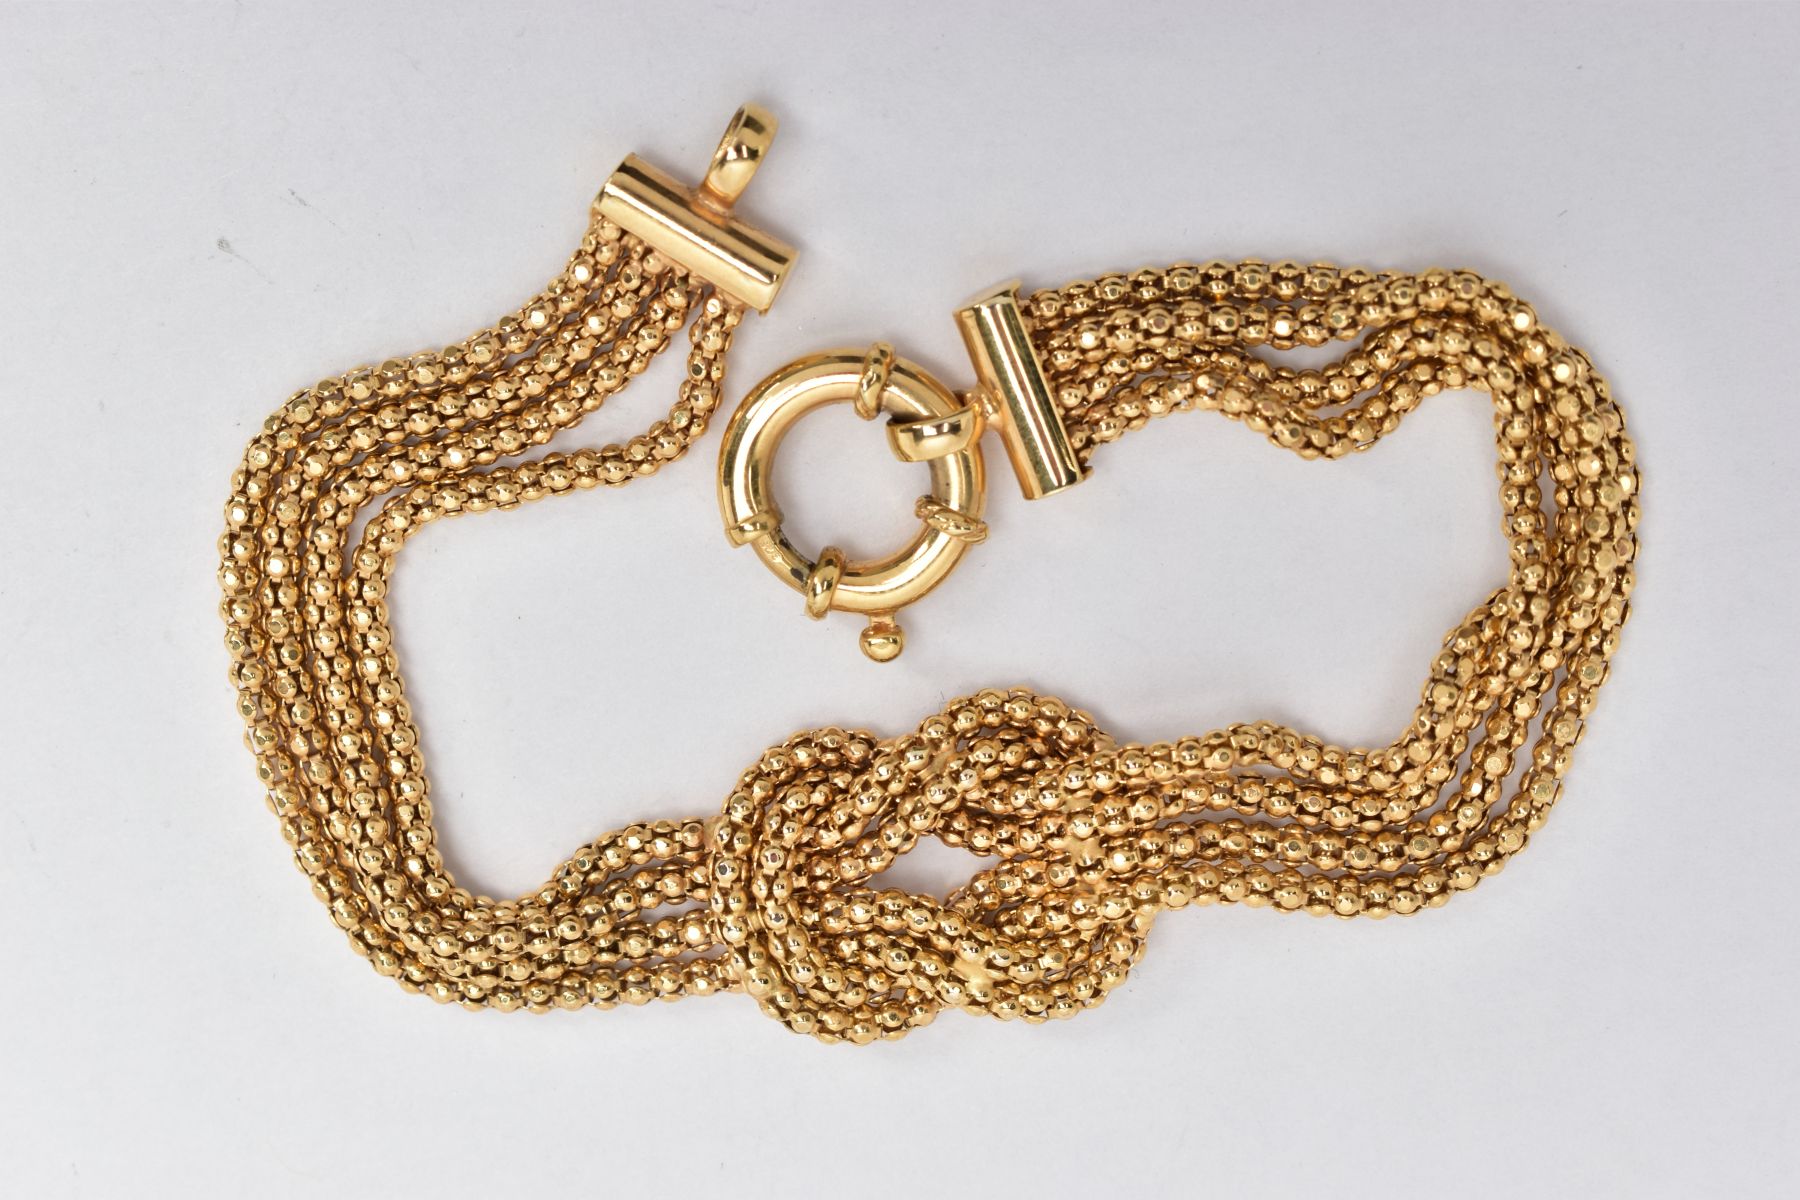 A 9CT GOLD KNOT BRACELET, four chains formed into a central knot, fitted with a large spring - Image 2 of 2